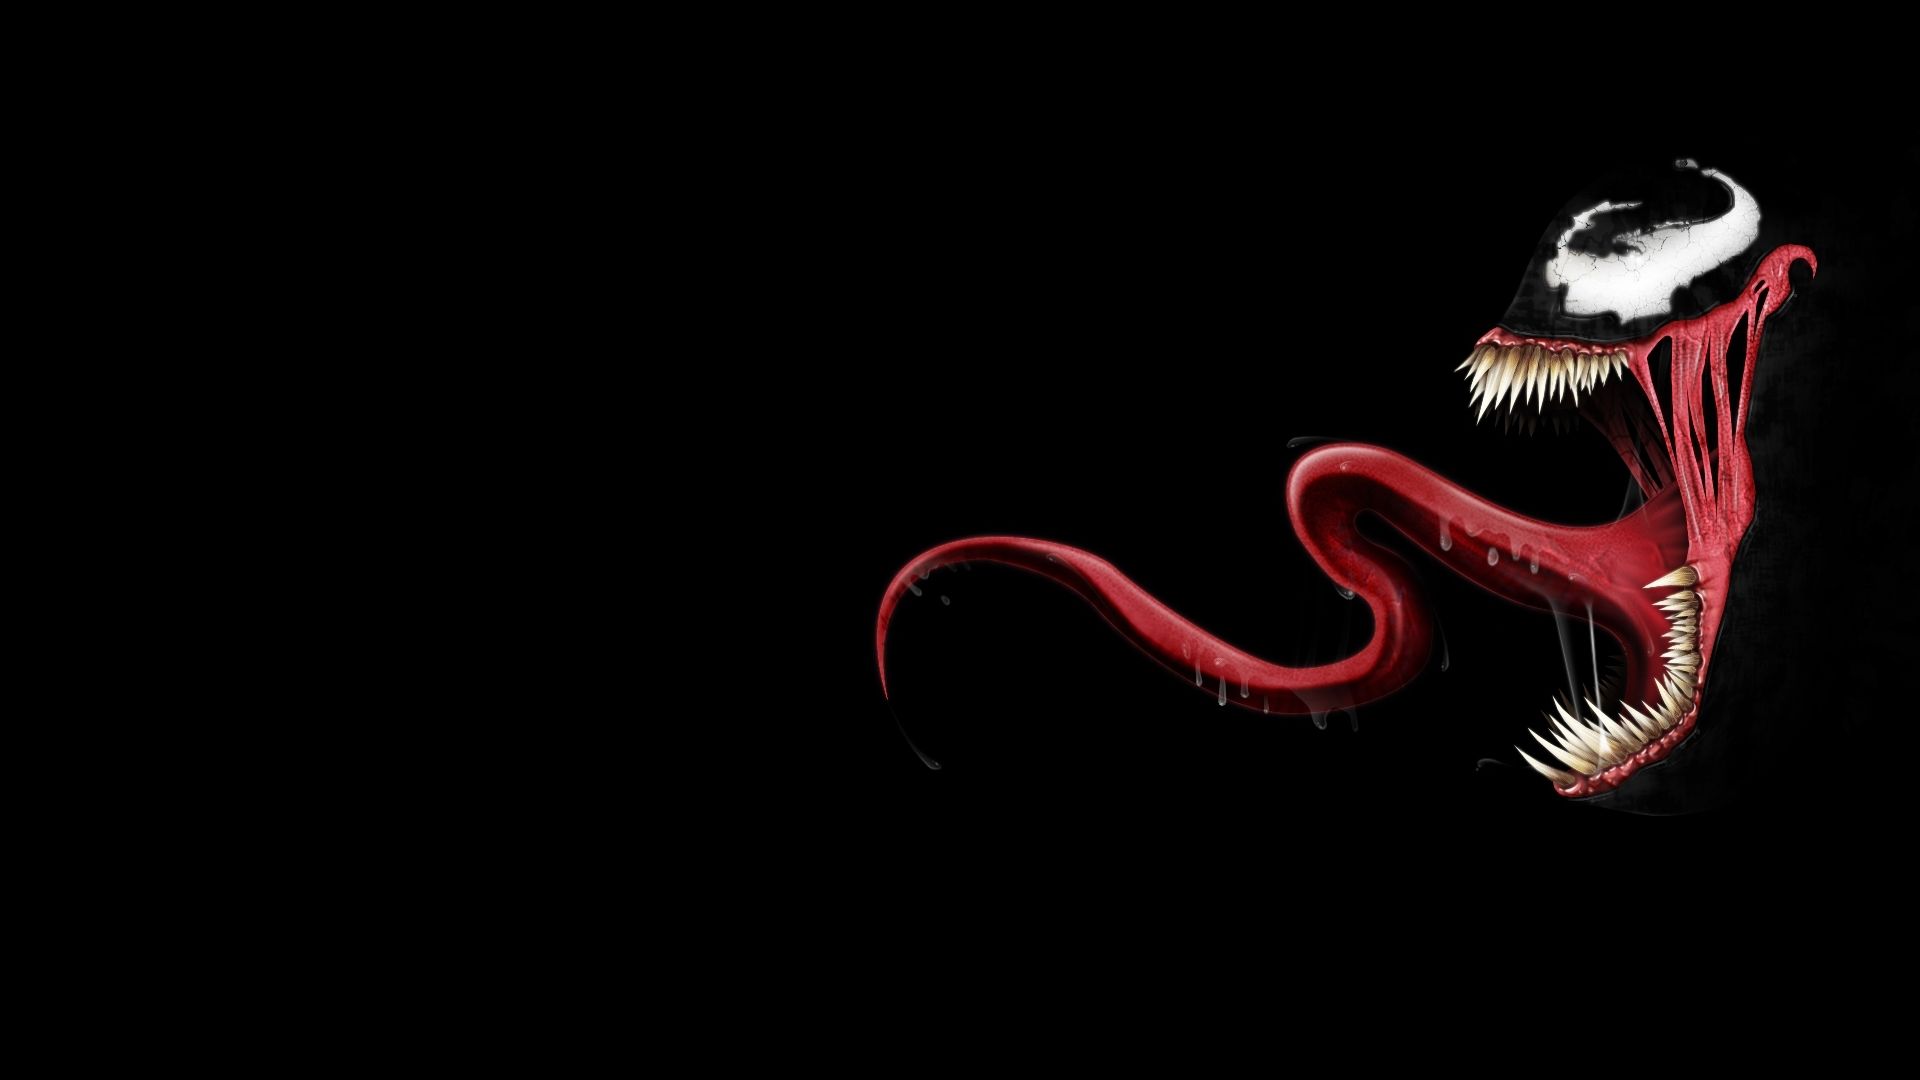  Venom Maximum Carnage HD Wallpapers Backgrounds